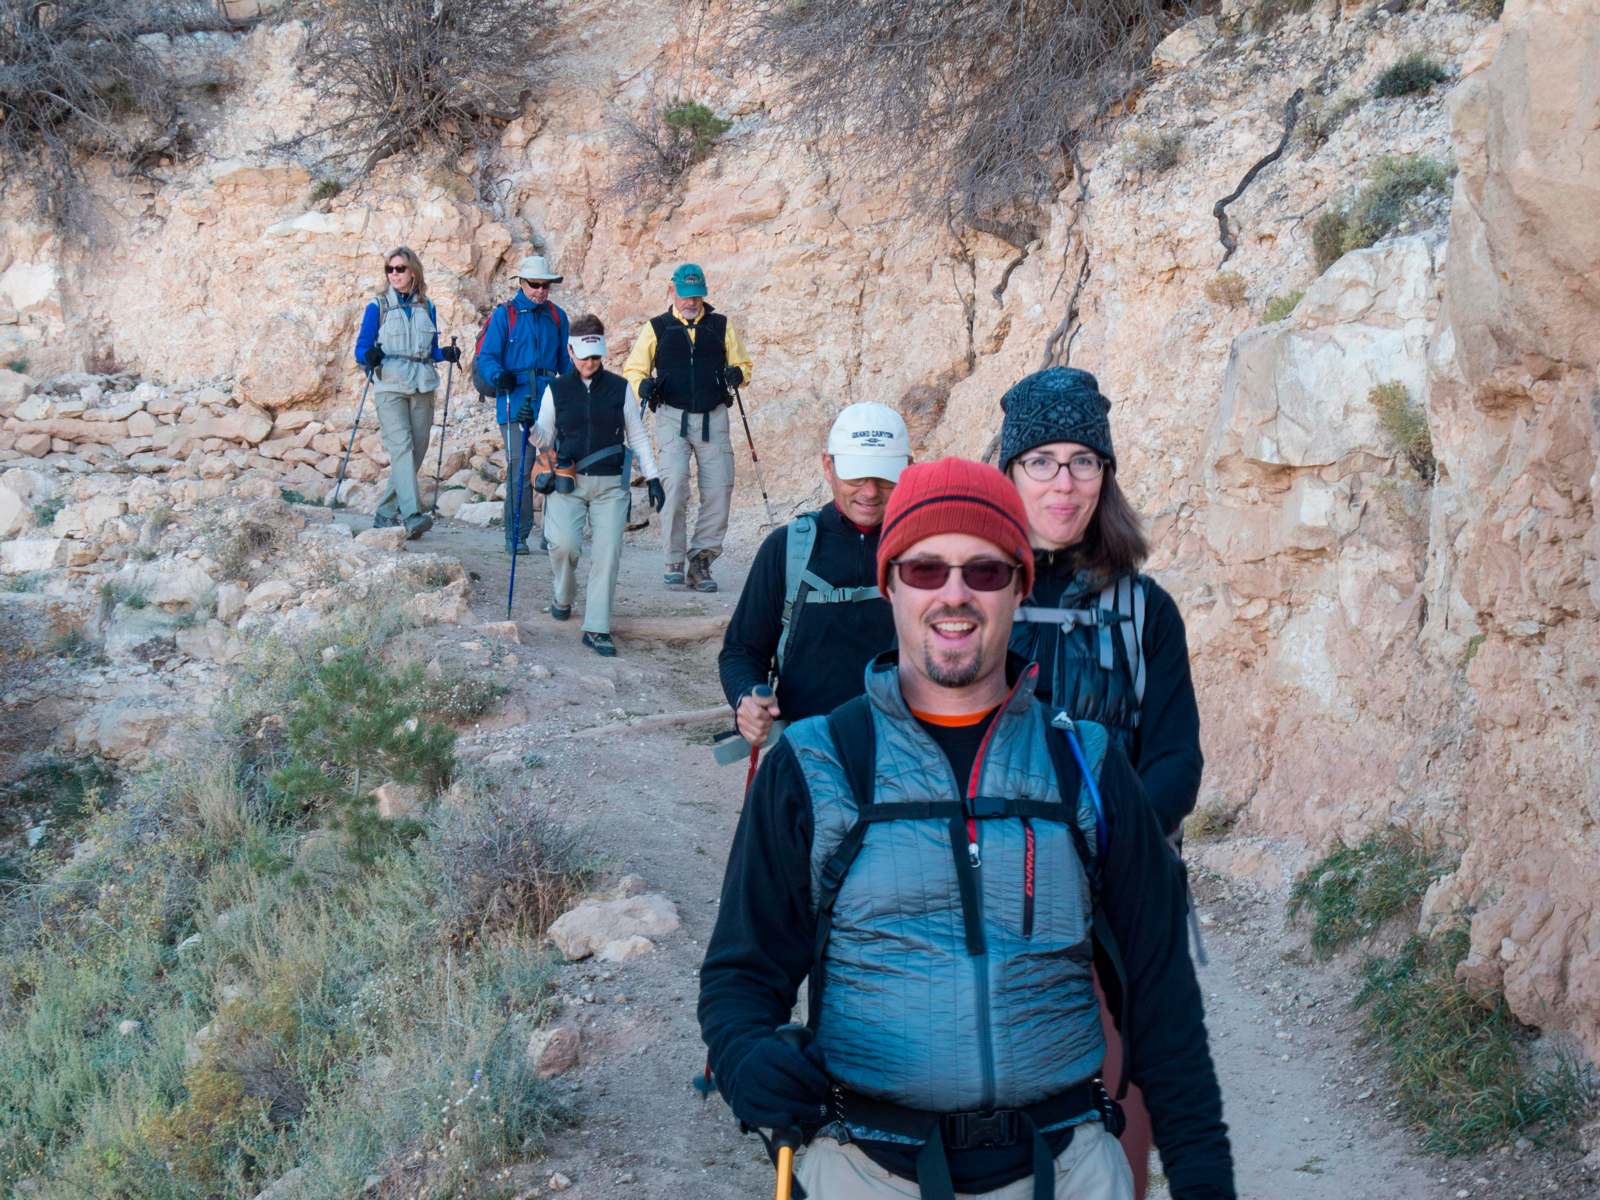 a group of people hiking on a trail